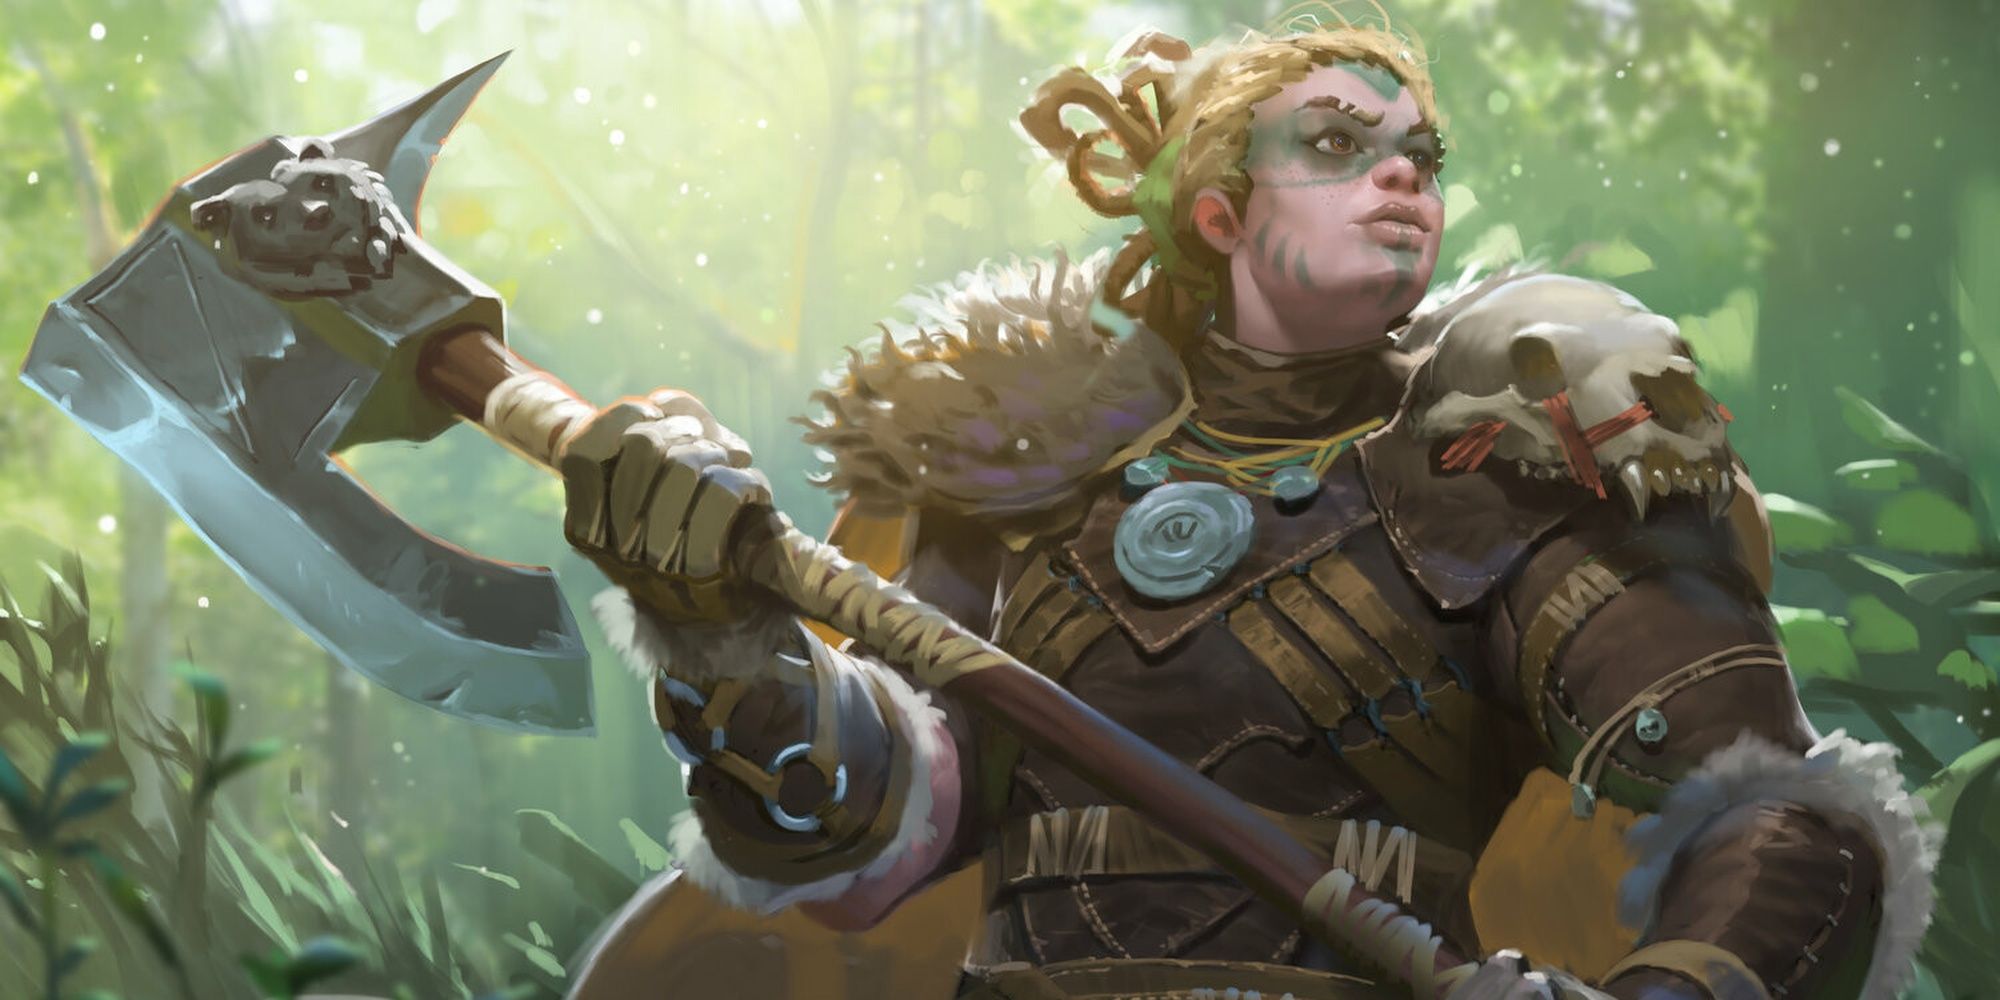 A barbarian holding her great axe, from Magic: The Gathering (MTG)